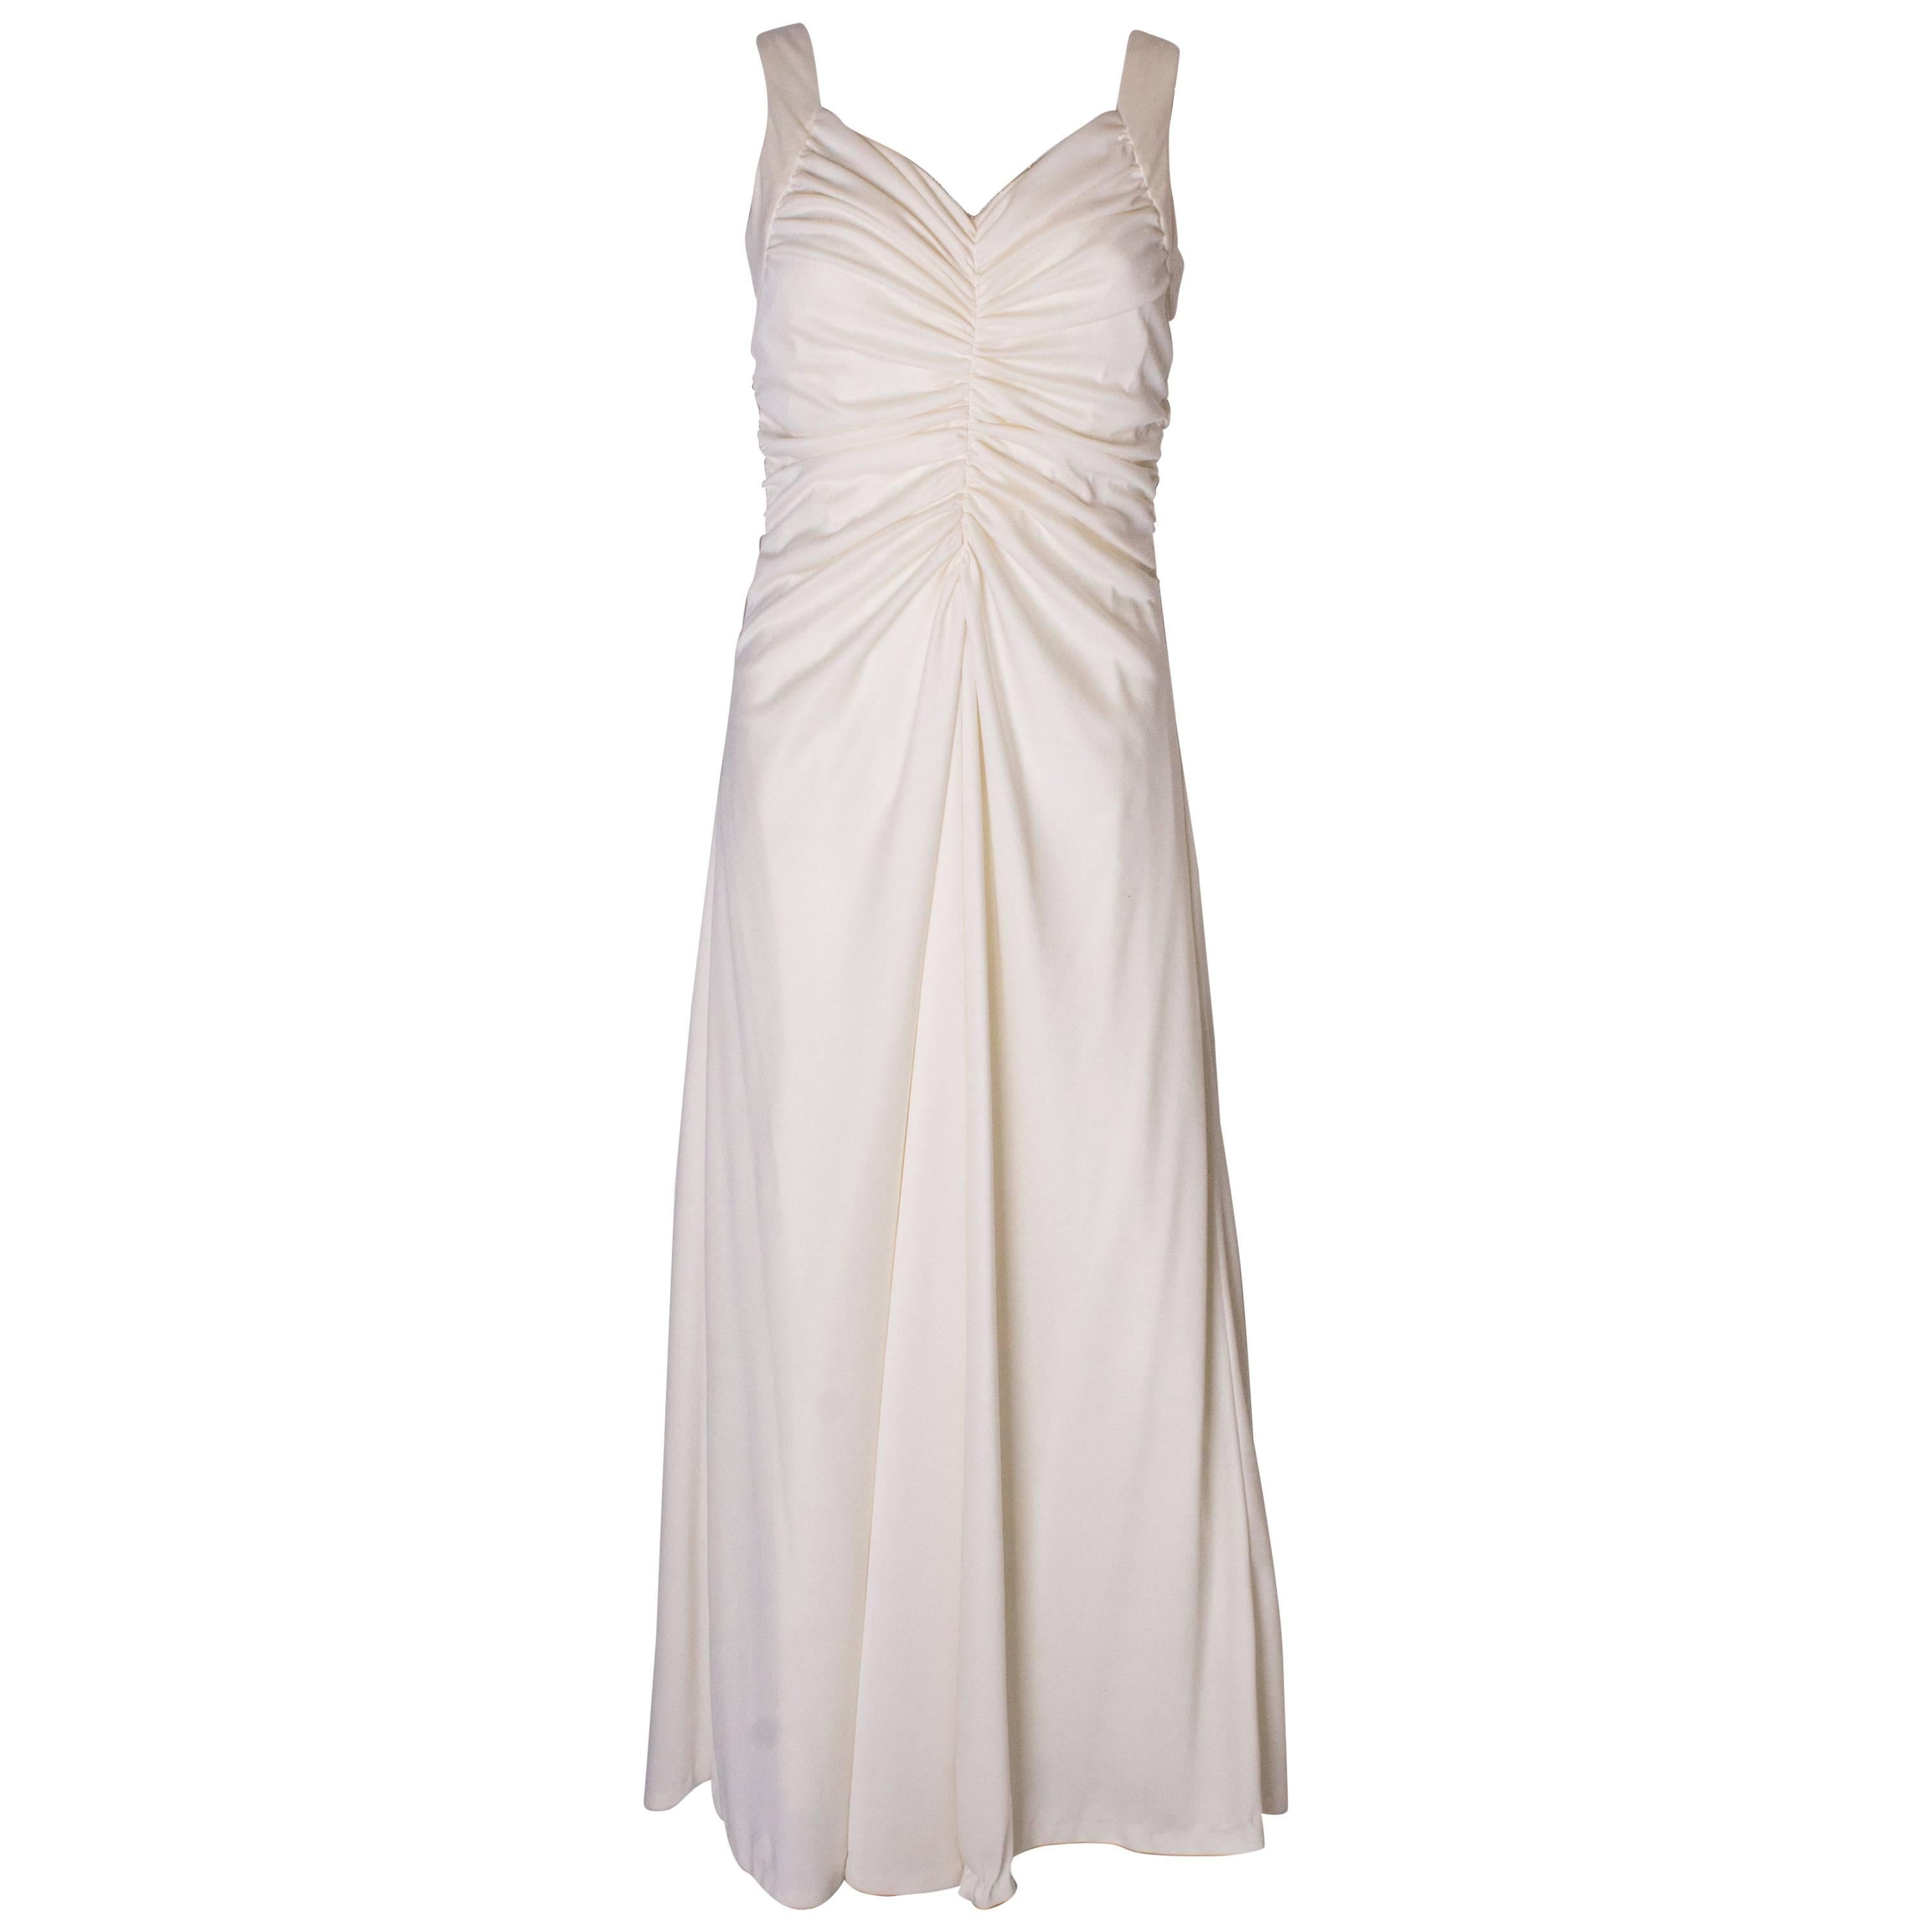 A Vintage 1970s cream evening dress by Maddison Avenue London 